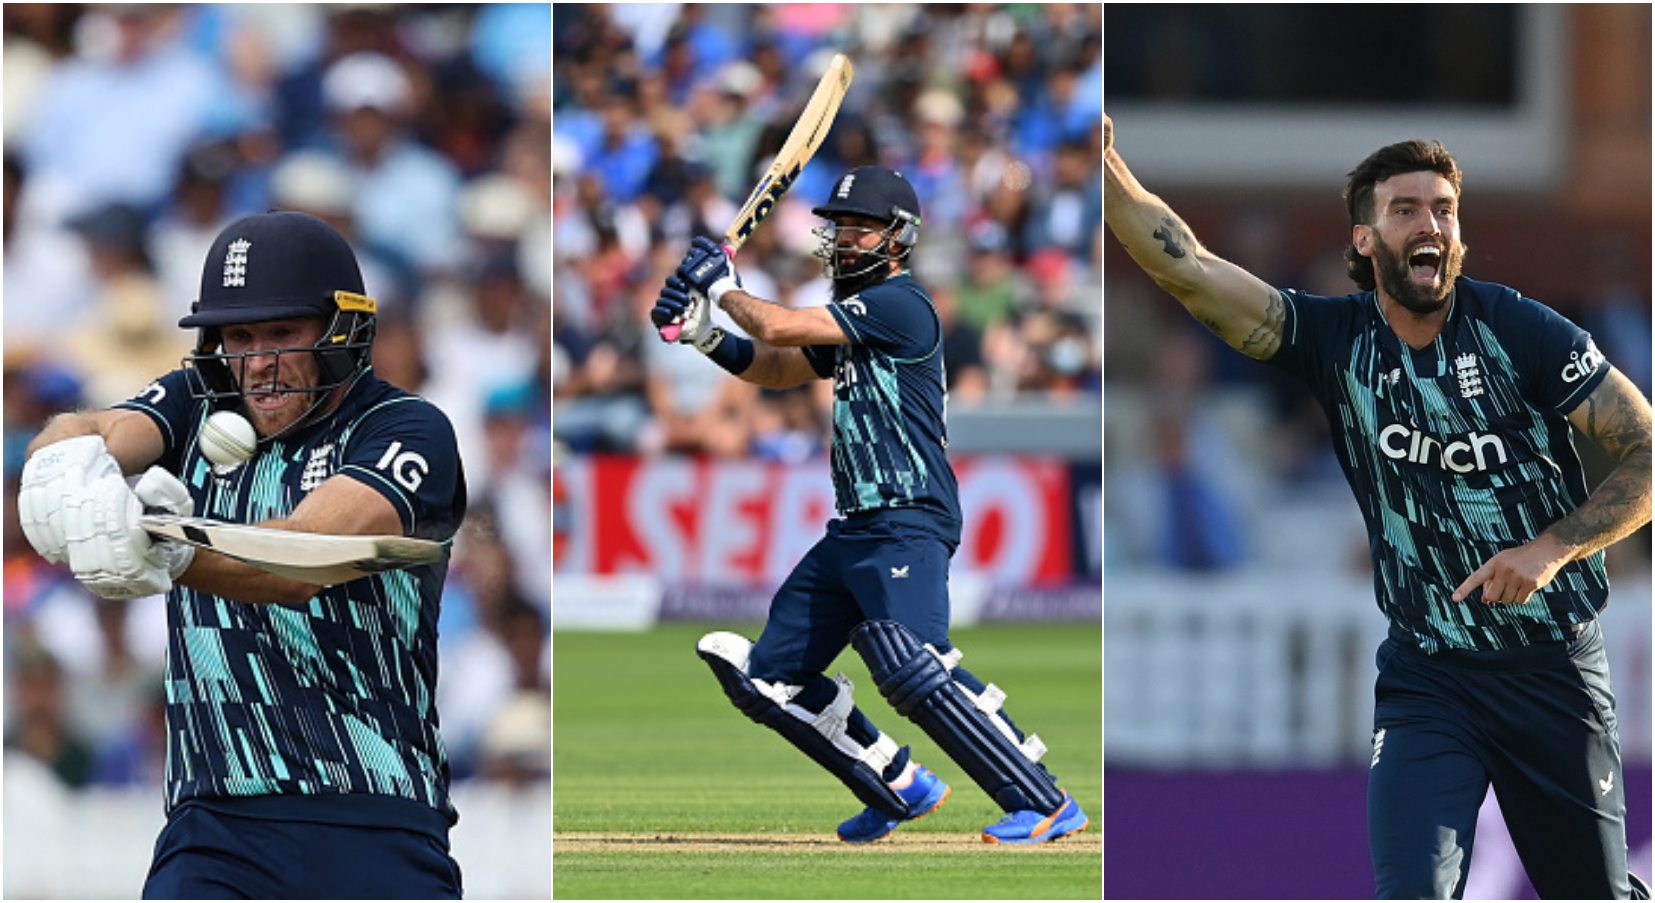 David Willey, Moeen Ali and Recce Topley | Getty